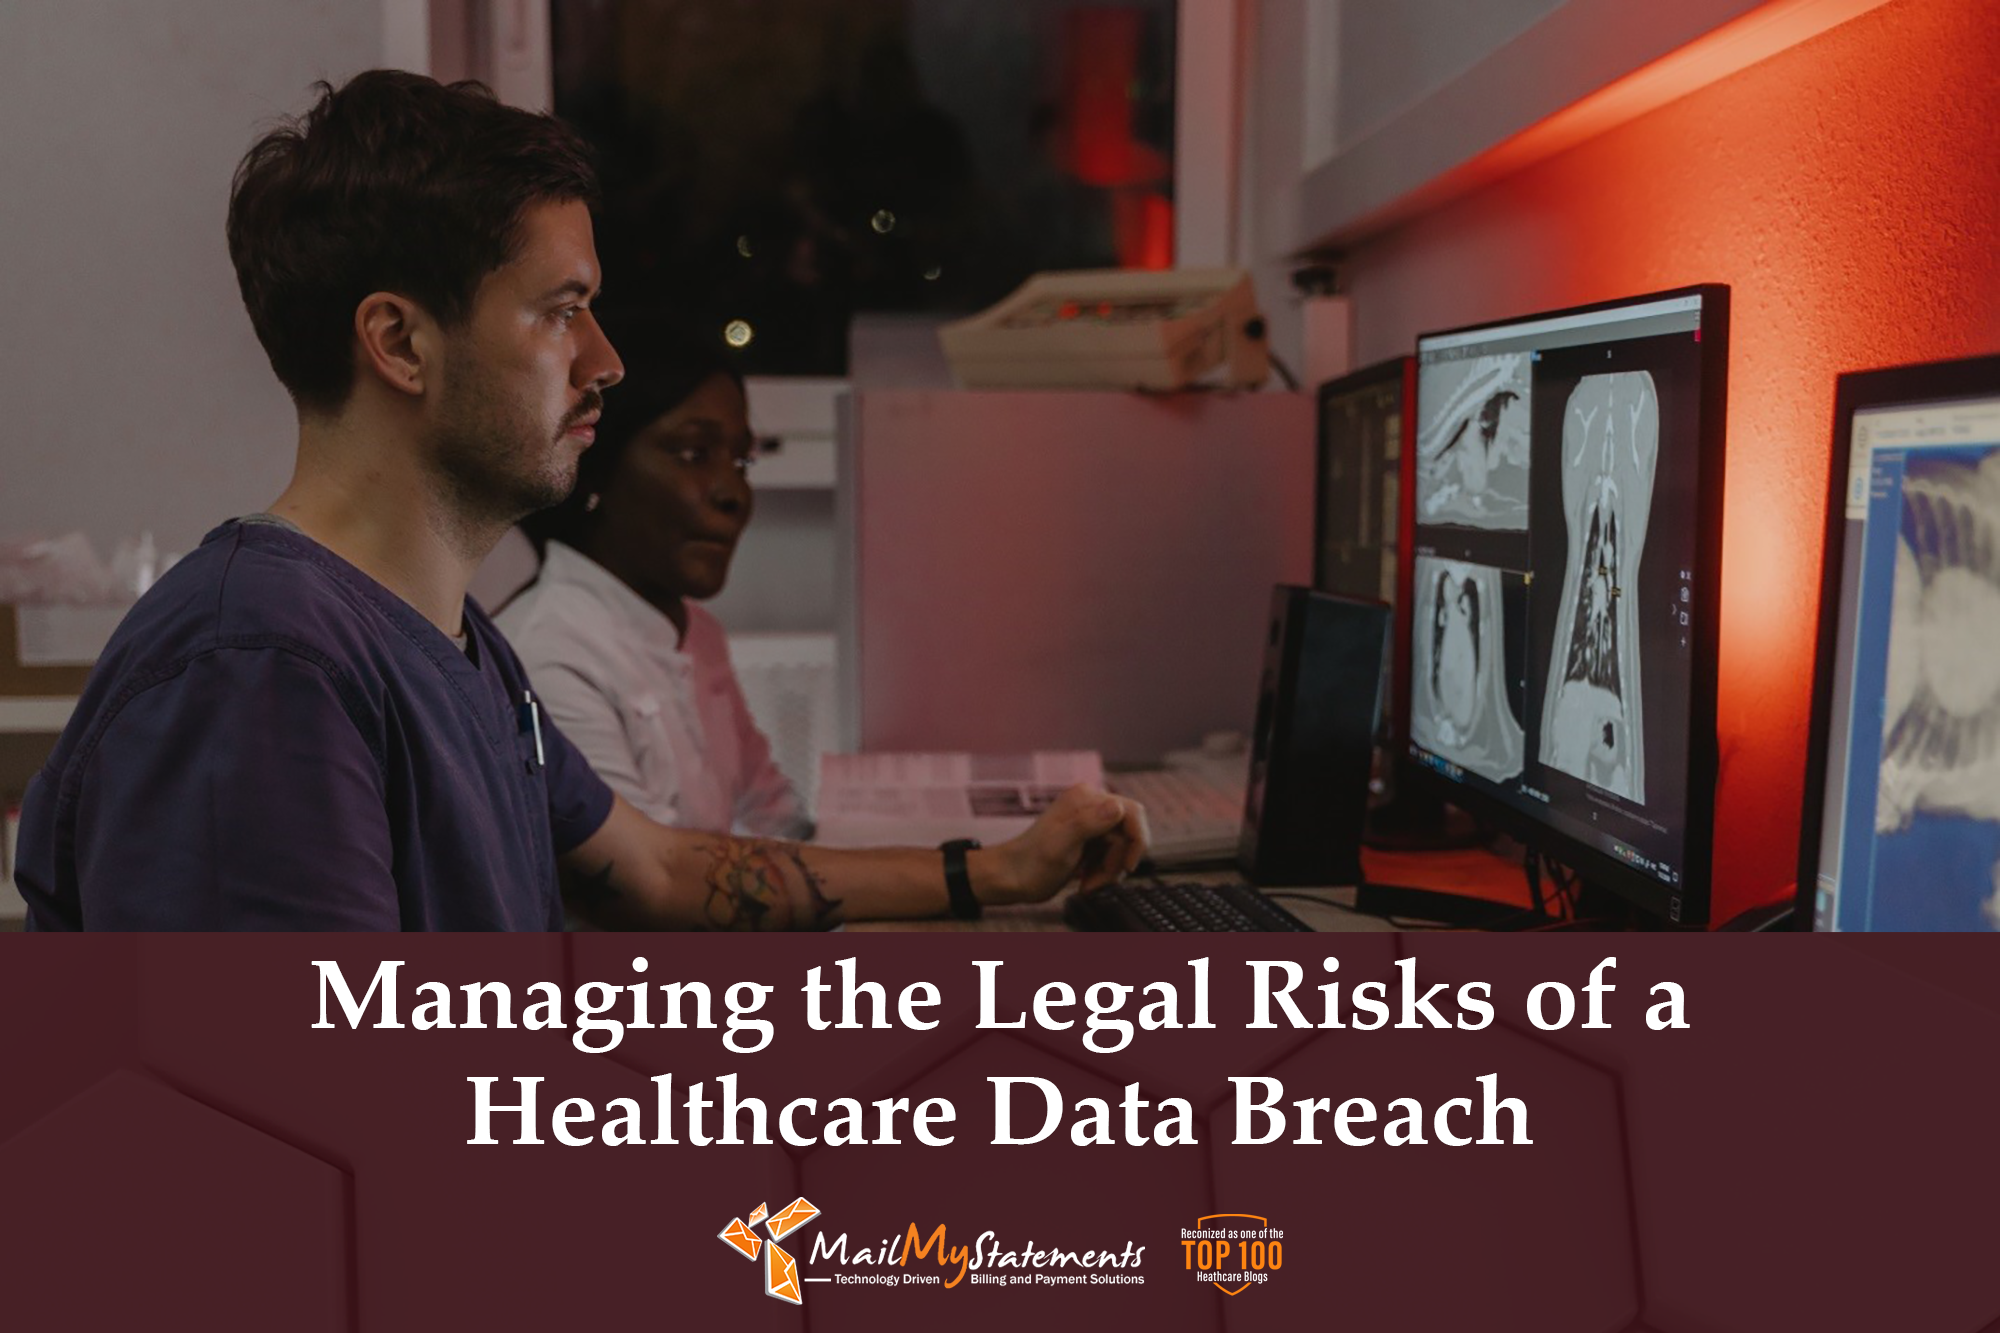 Managing the Legal Risks of a Healthcare Data Breach